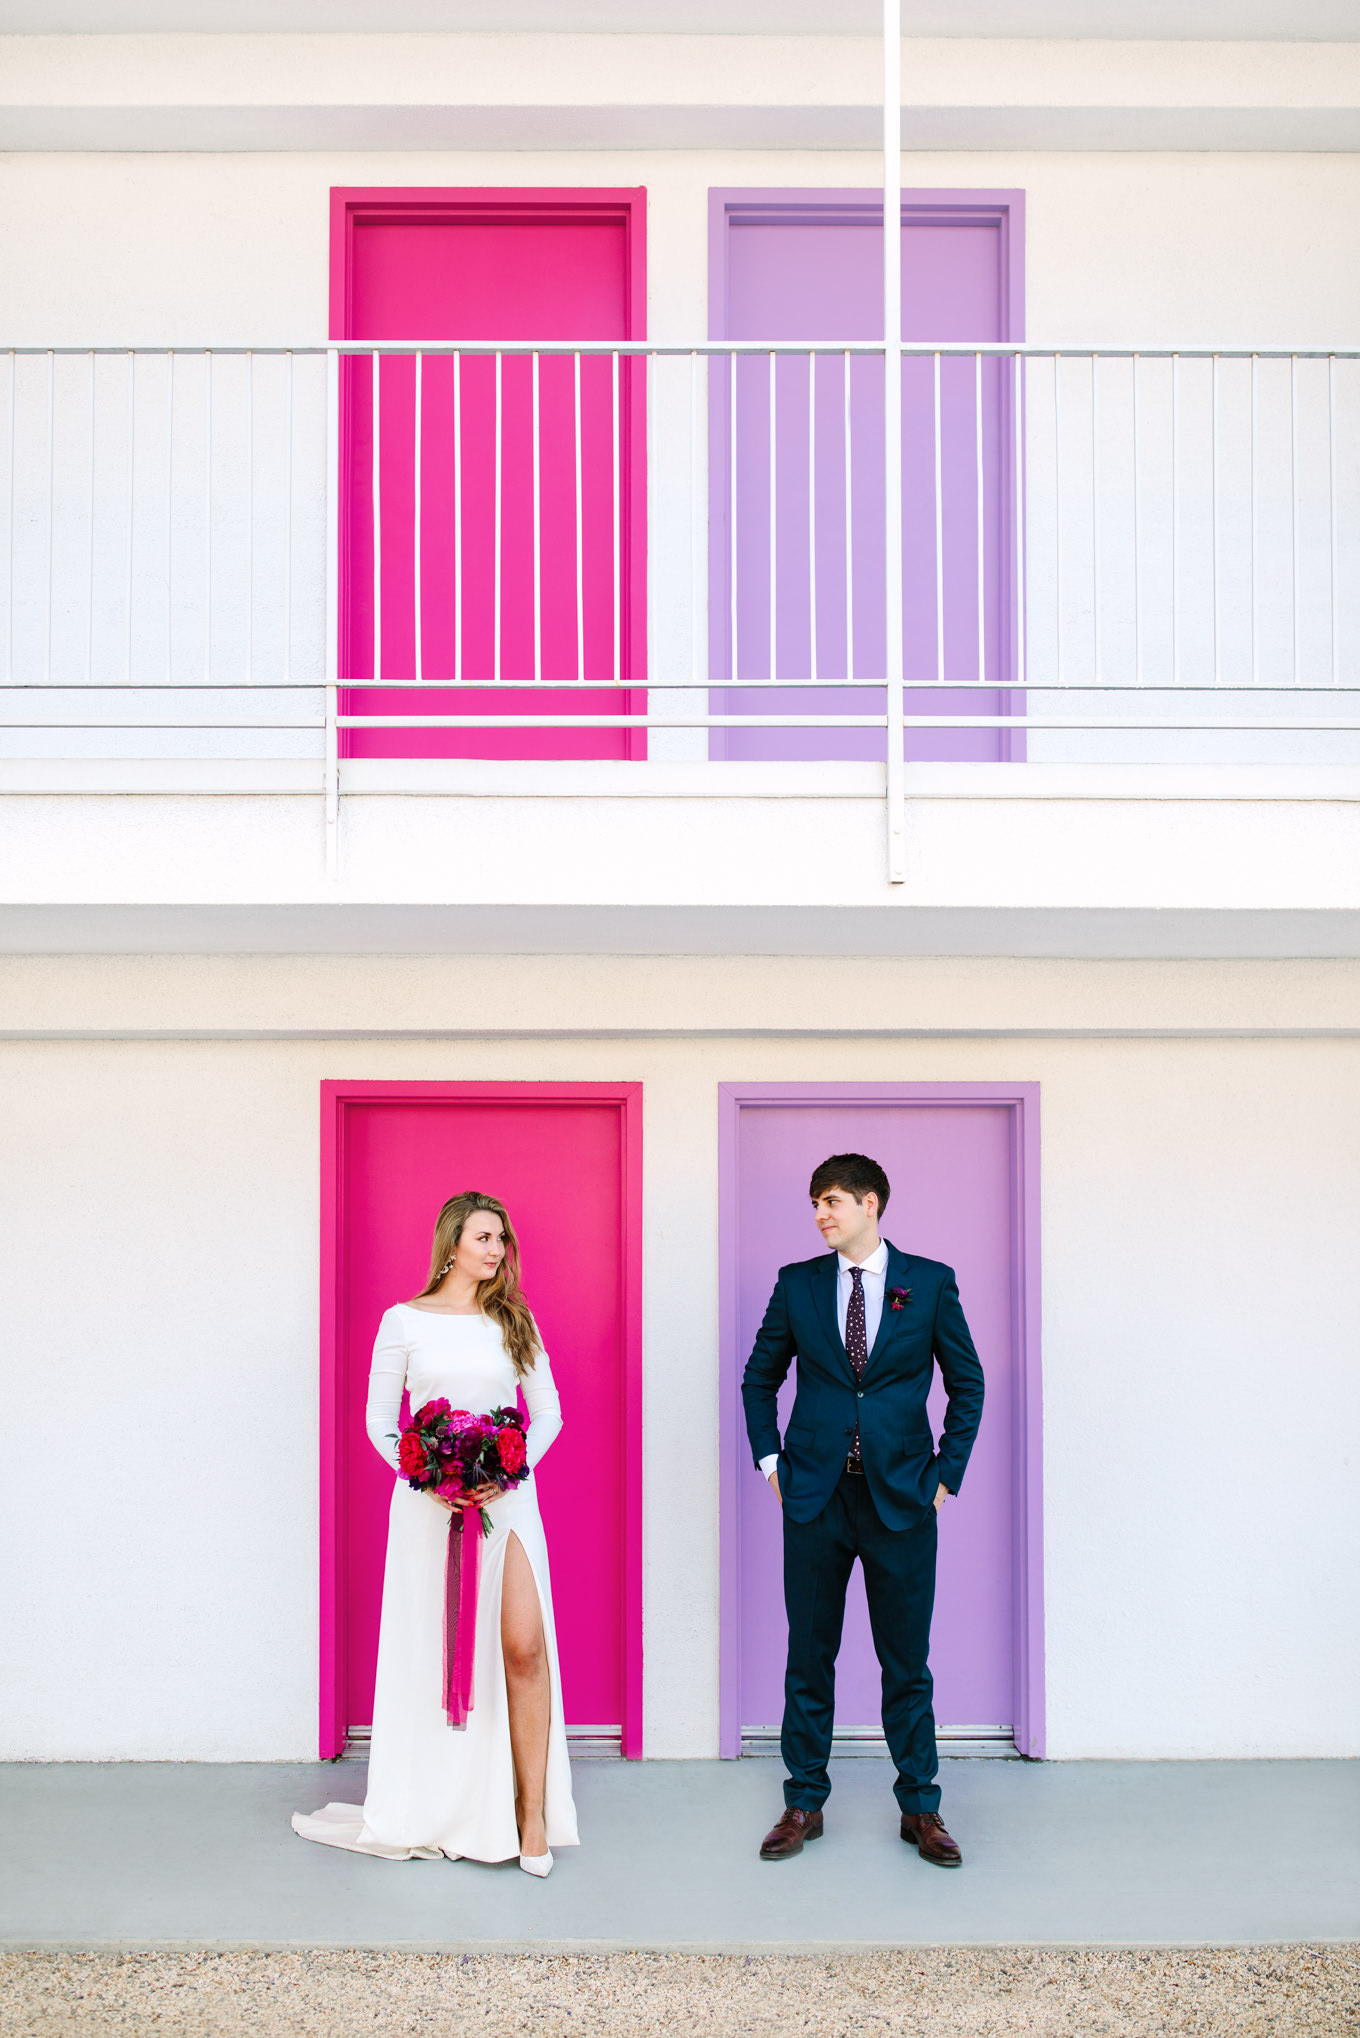 Bride and groom at colorful Saguaro Hotel | Colorful jewel tone Palm Springs elopement | Fresh and colorful photography for fun-loving couples in Southern California | #colorfulelopement #palmspringselopement #elopementphotography #palmspringswedding Source: Mary Costa Photography | Los Angeles